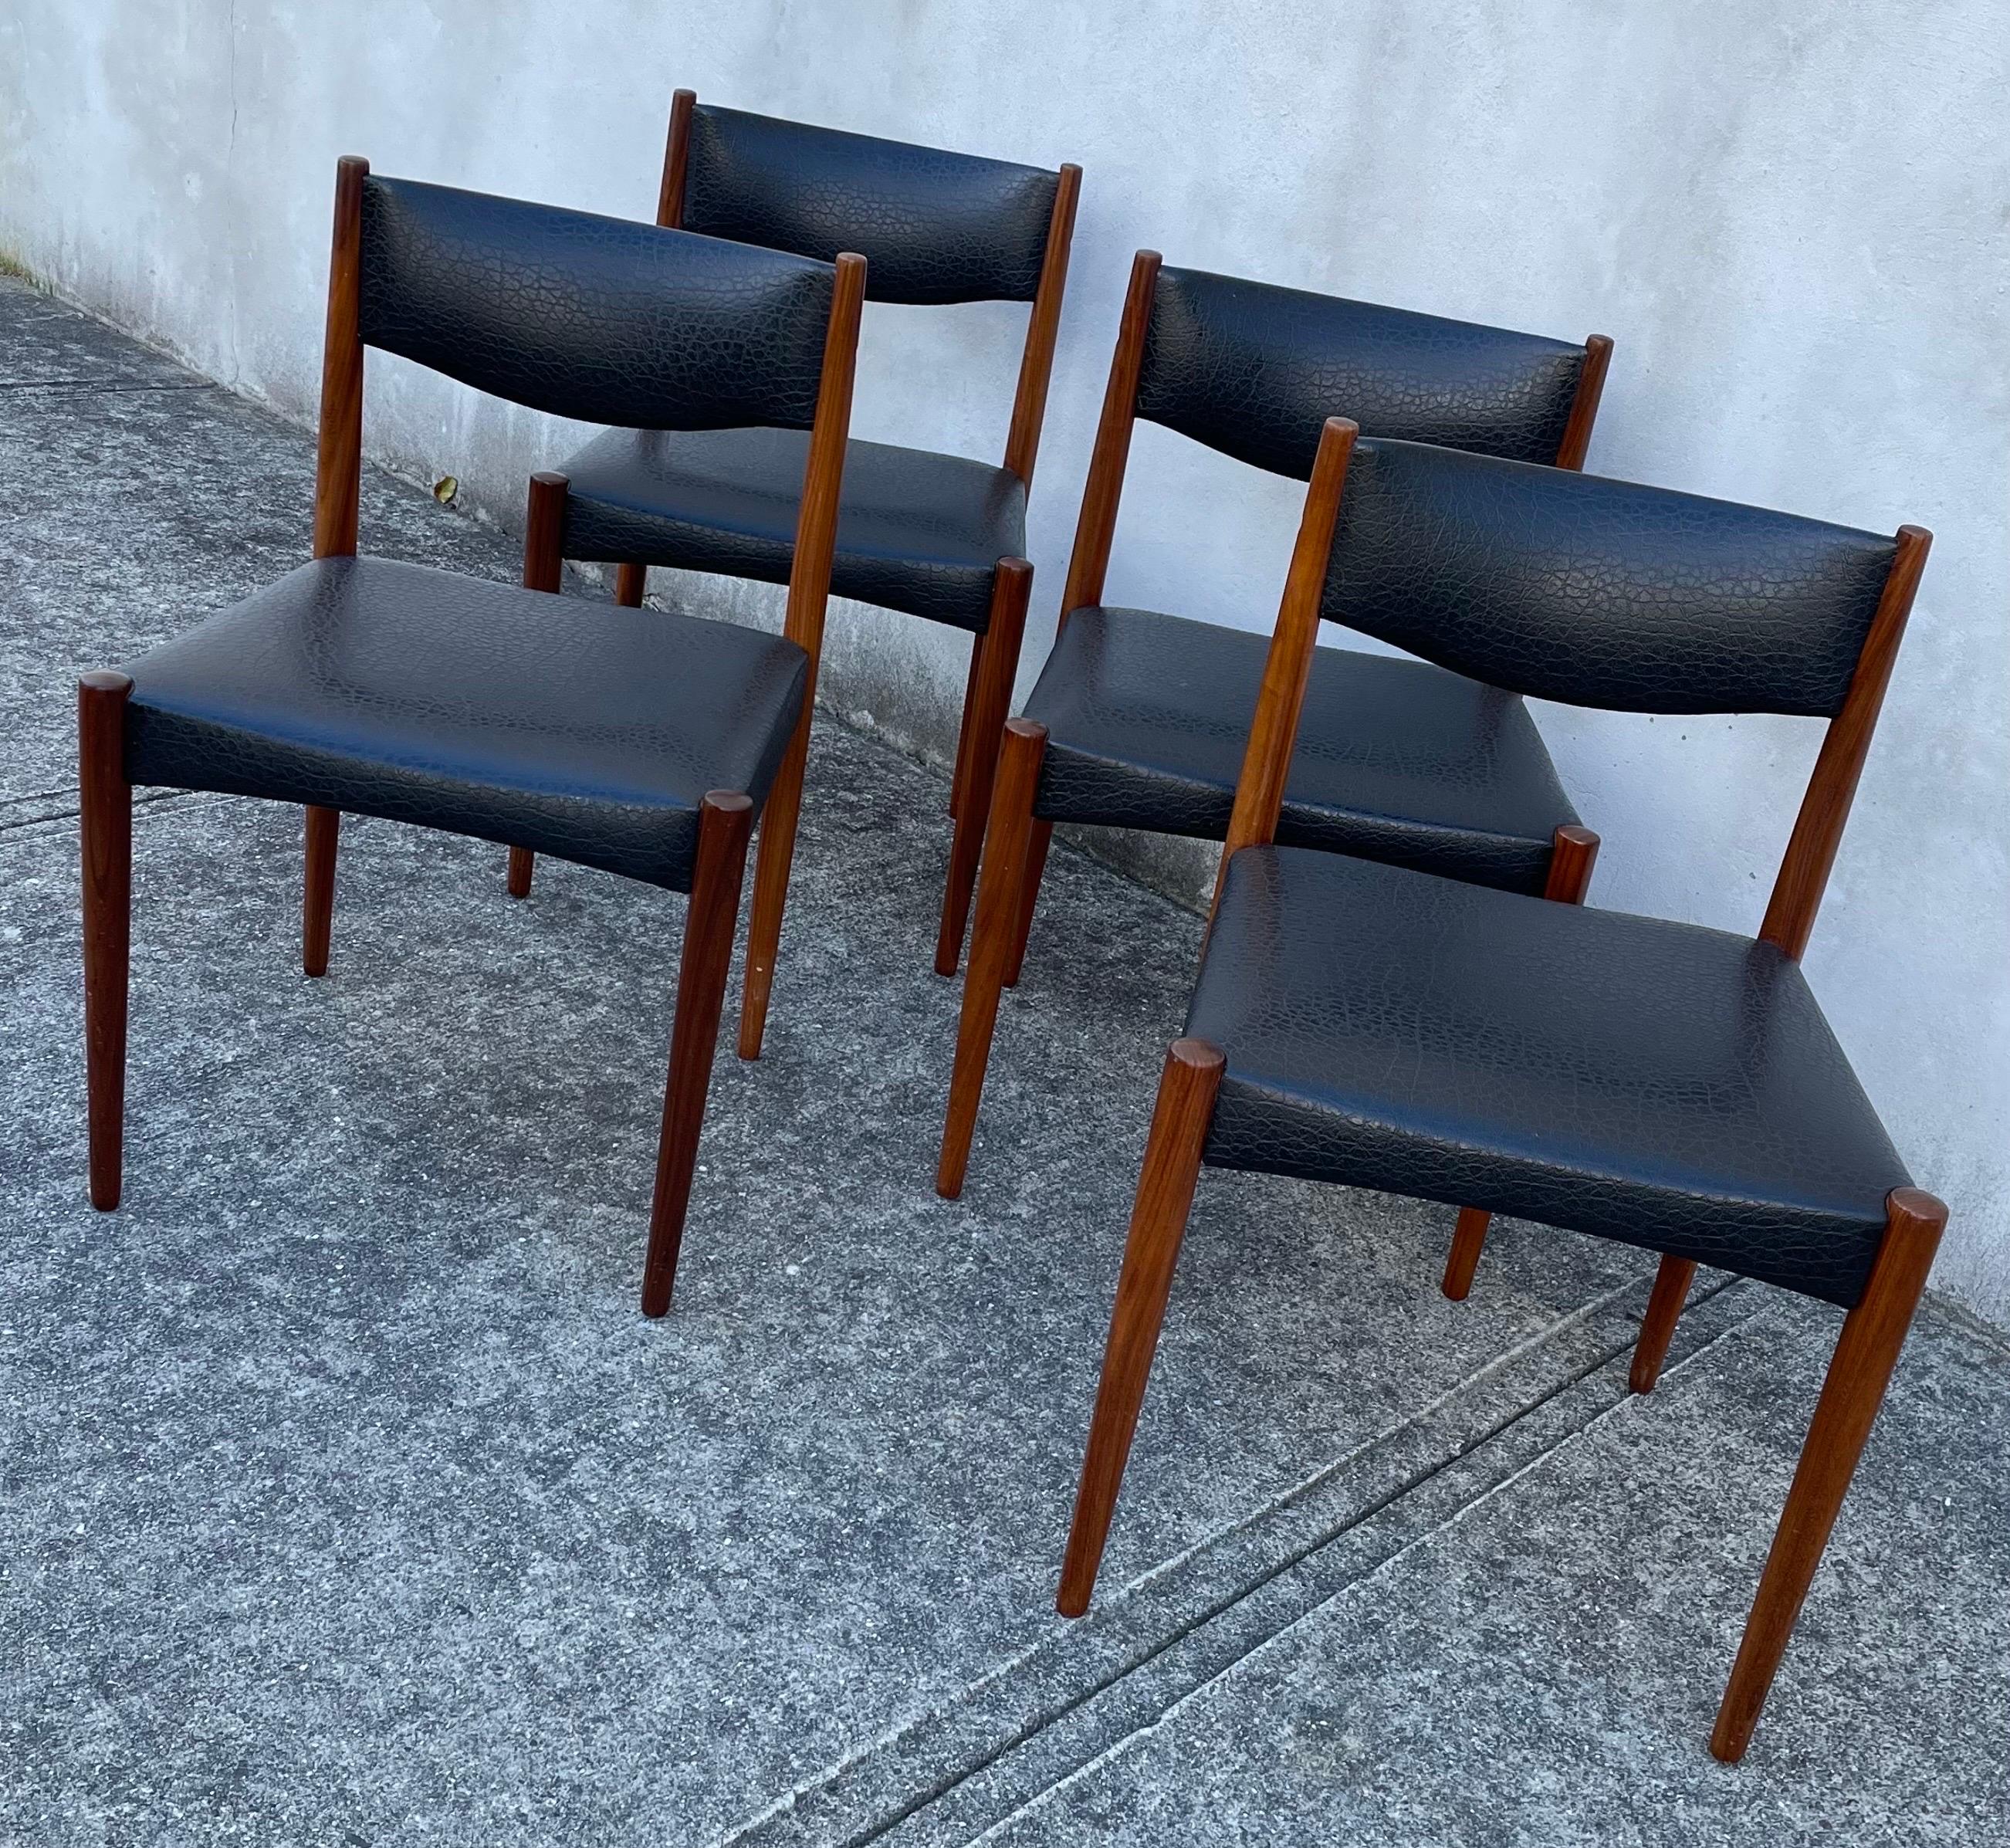 Dutch Set of Four Mid-Century Modern Teak Dining Chairs, Faux Black Leather Seats For Sale